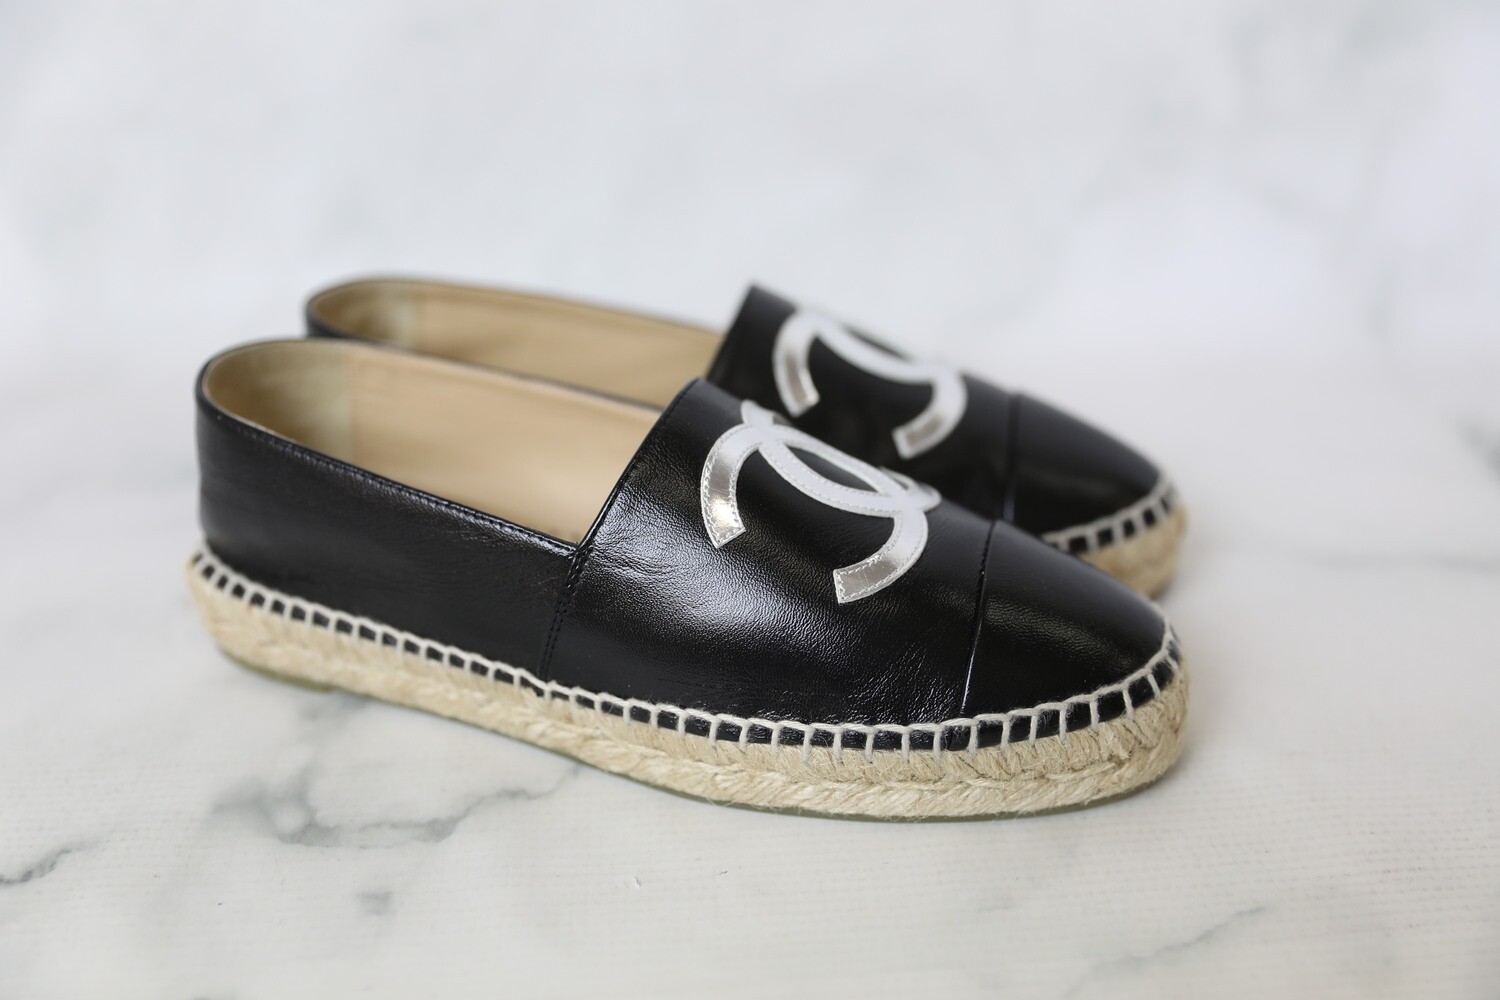 Chanel Shoes Espadrilles, Black with Silver CC, Size 38, New in Box WA001